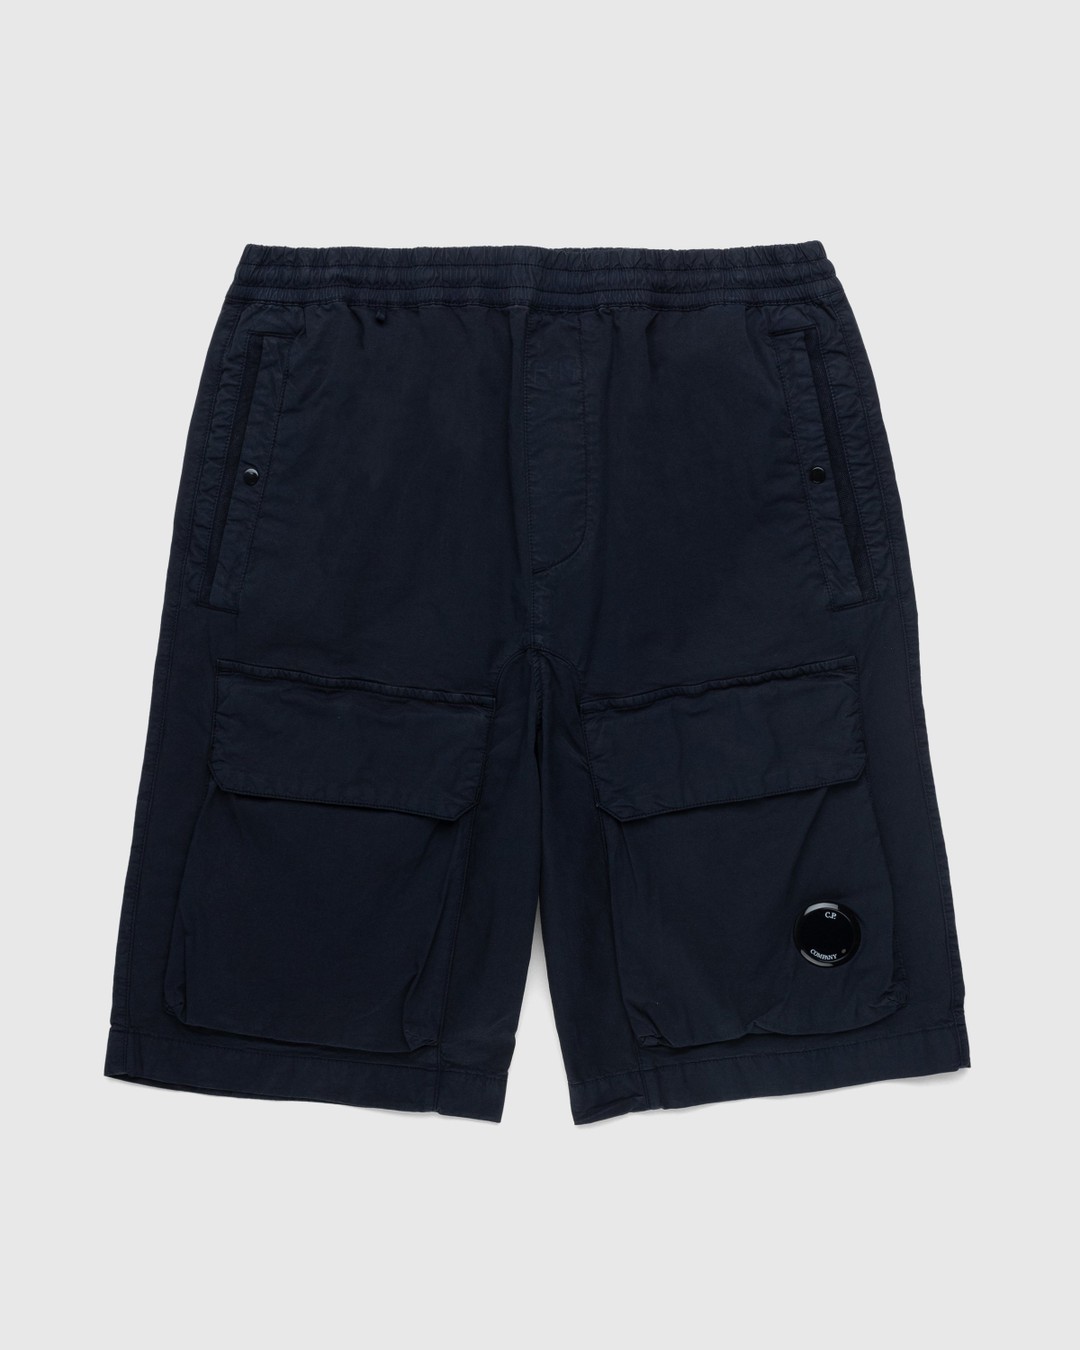 C.P. Company – Twill Stretch Utility Shorts Total Eclipse Blue - Shorts - Blue - Image 1